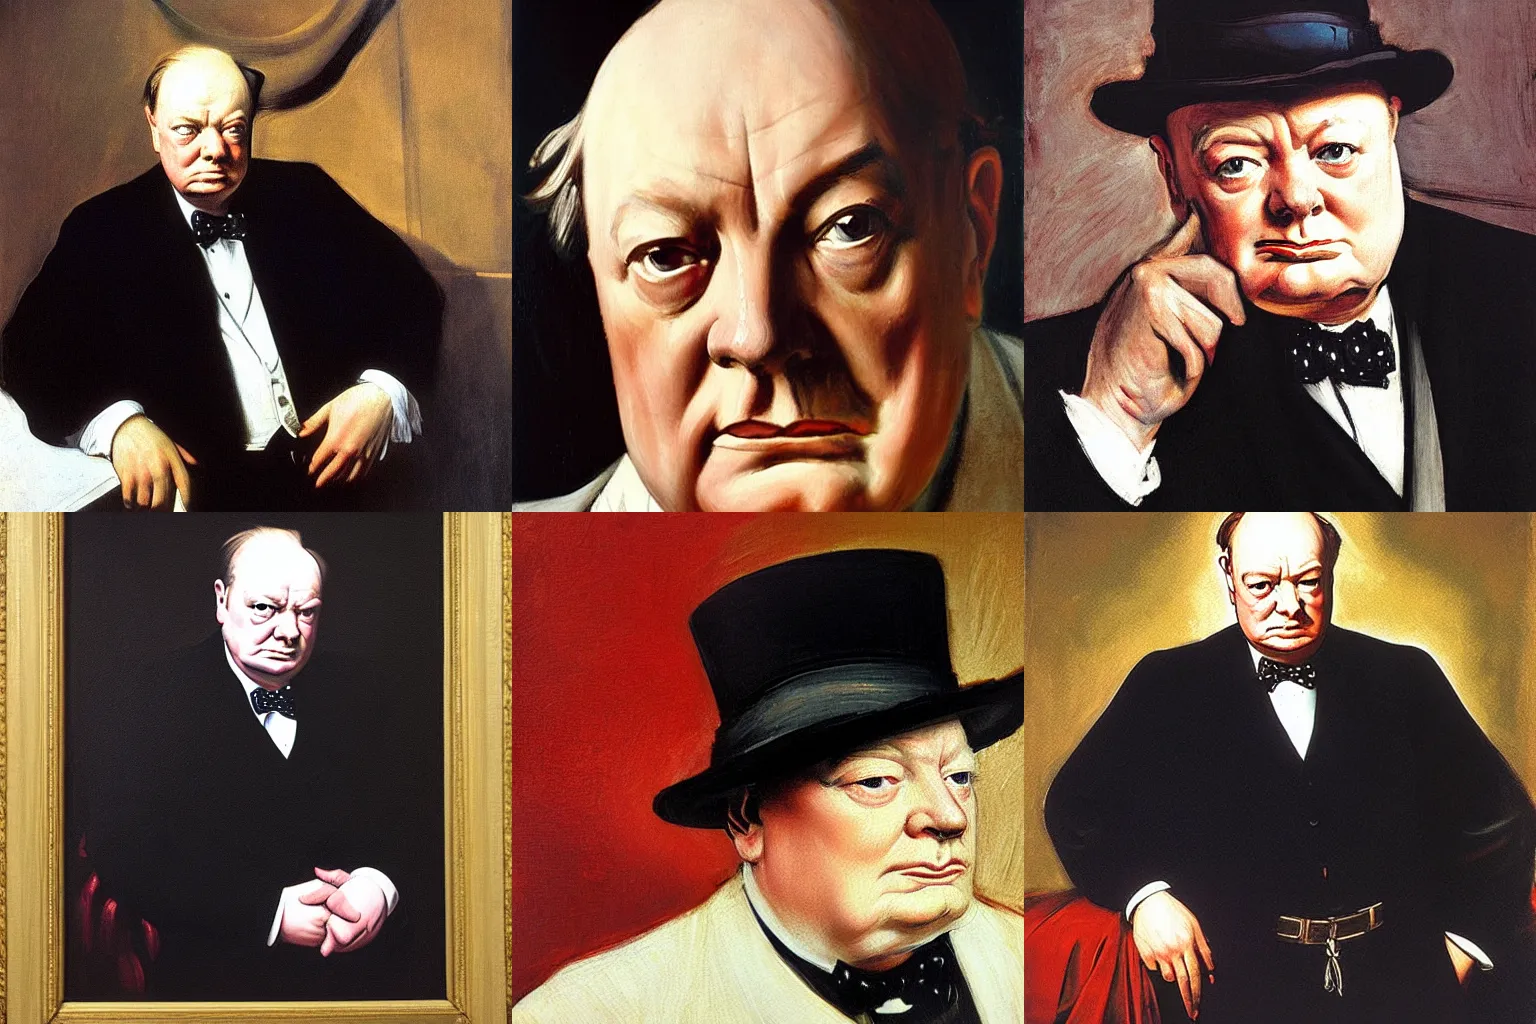 Prompt: Winston Churchill painted by Caravaggio